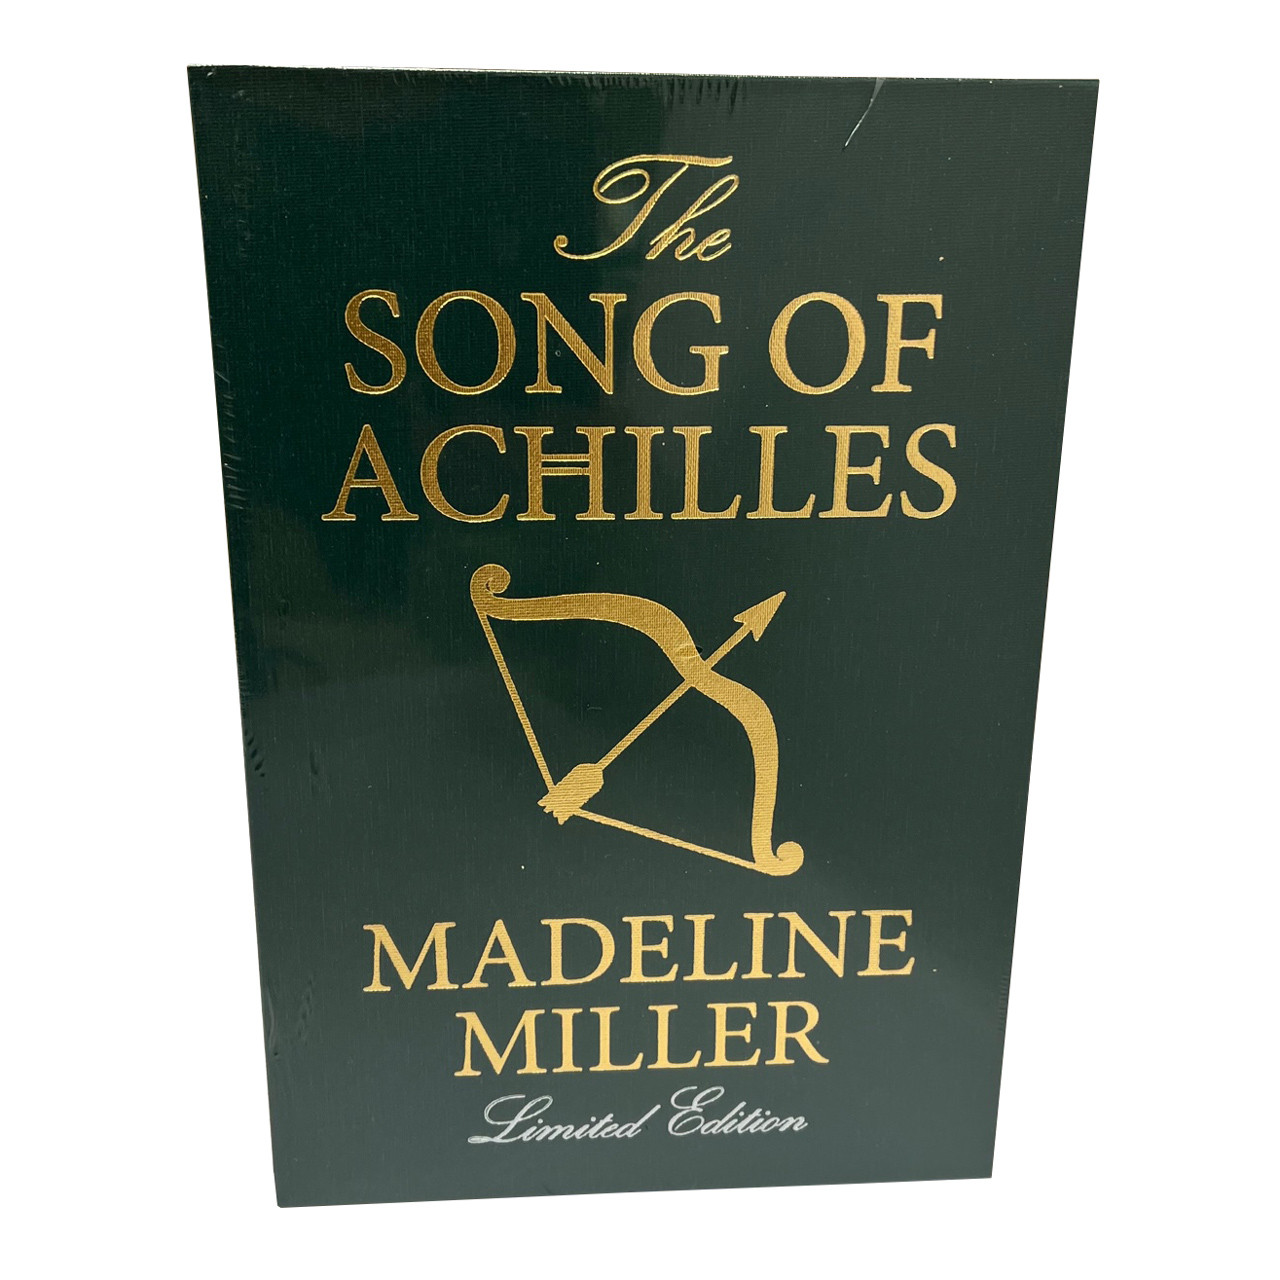 Madeline Miller "The Song of Achilles" Signed Collector's Edition, Slipcased Limited Edition of 50 w/COA [Double Sealed]